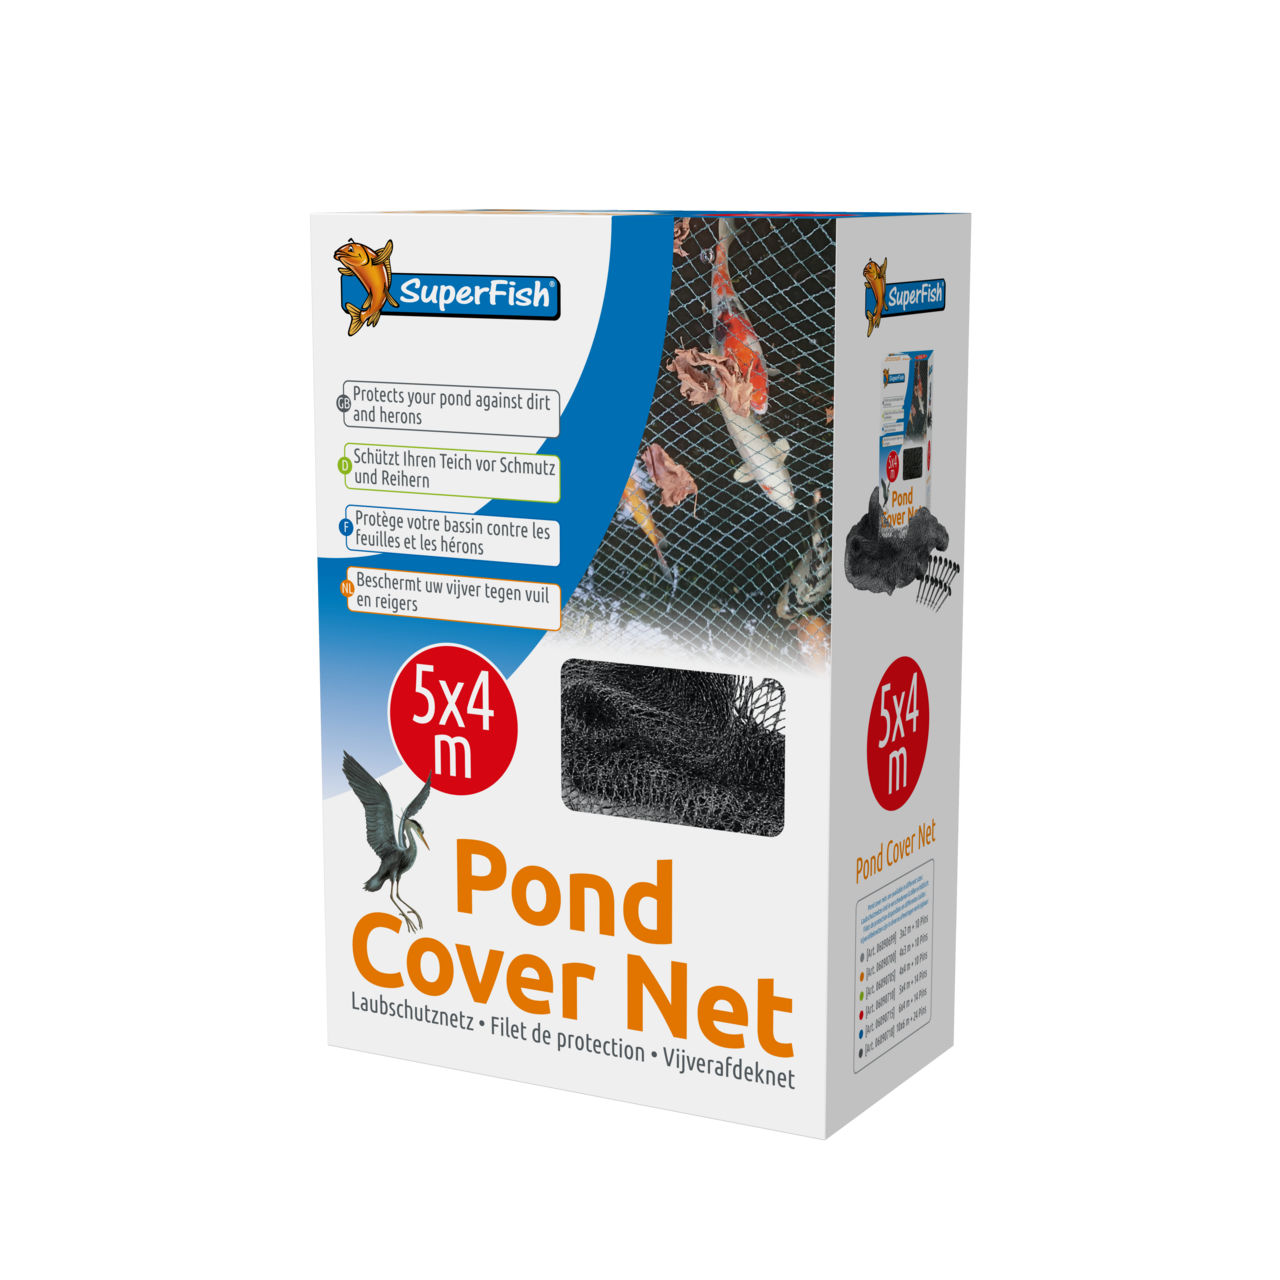 Superfish Pond Cover Net 5x4mt